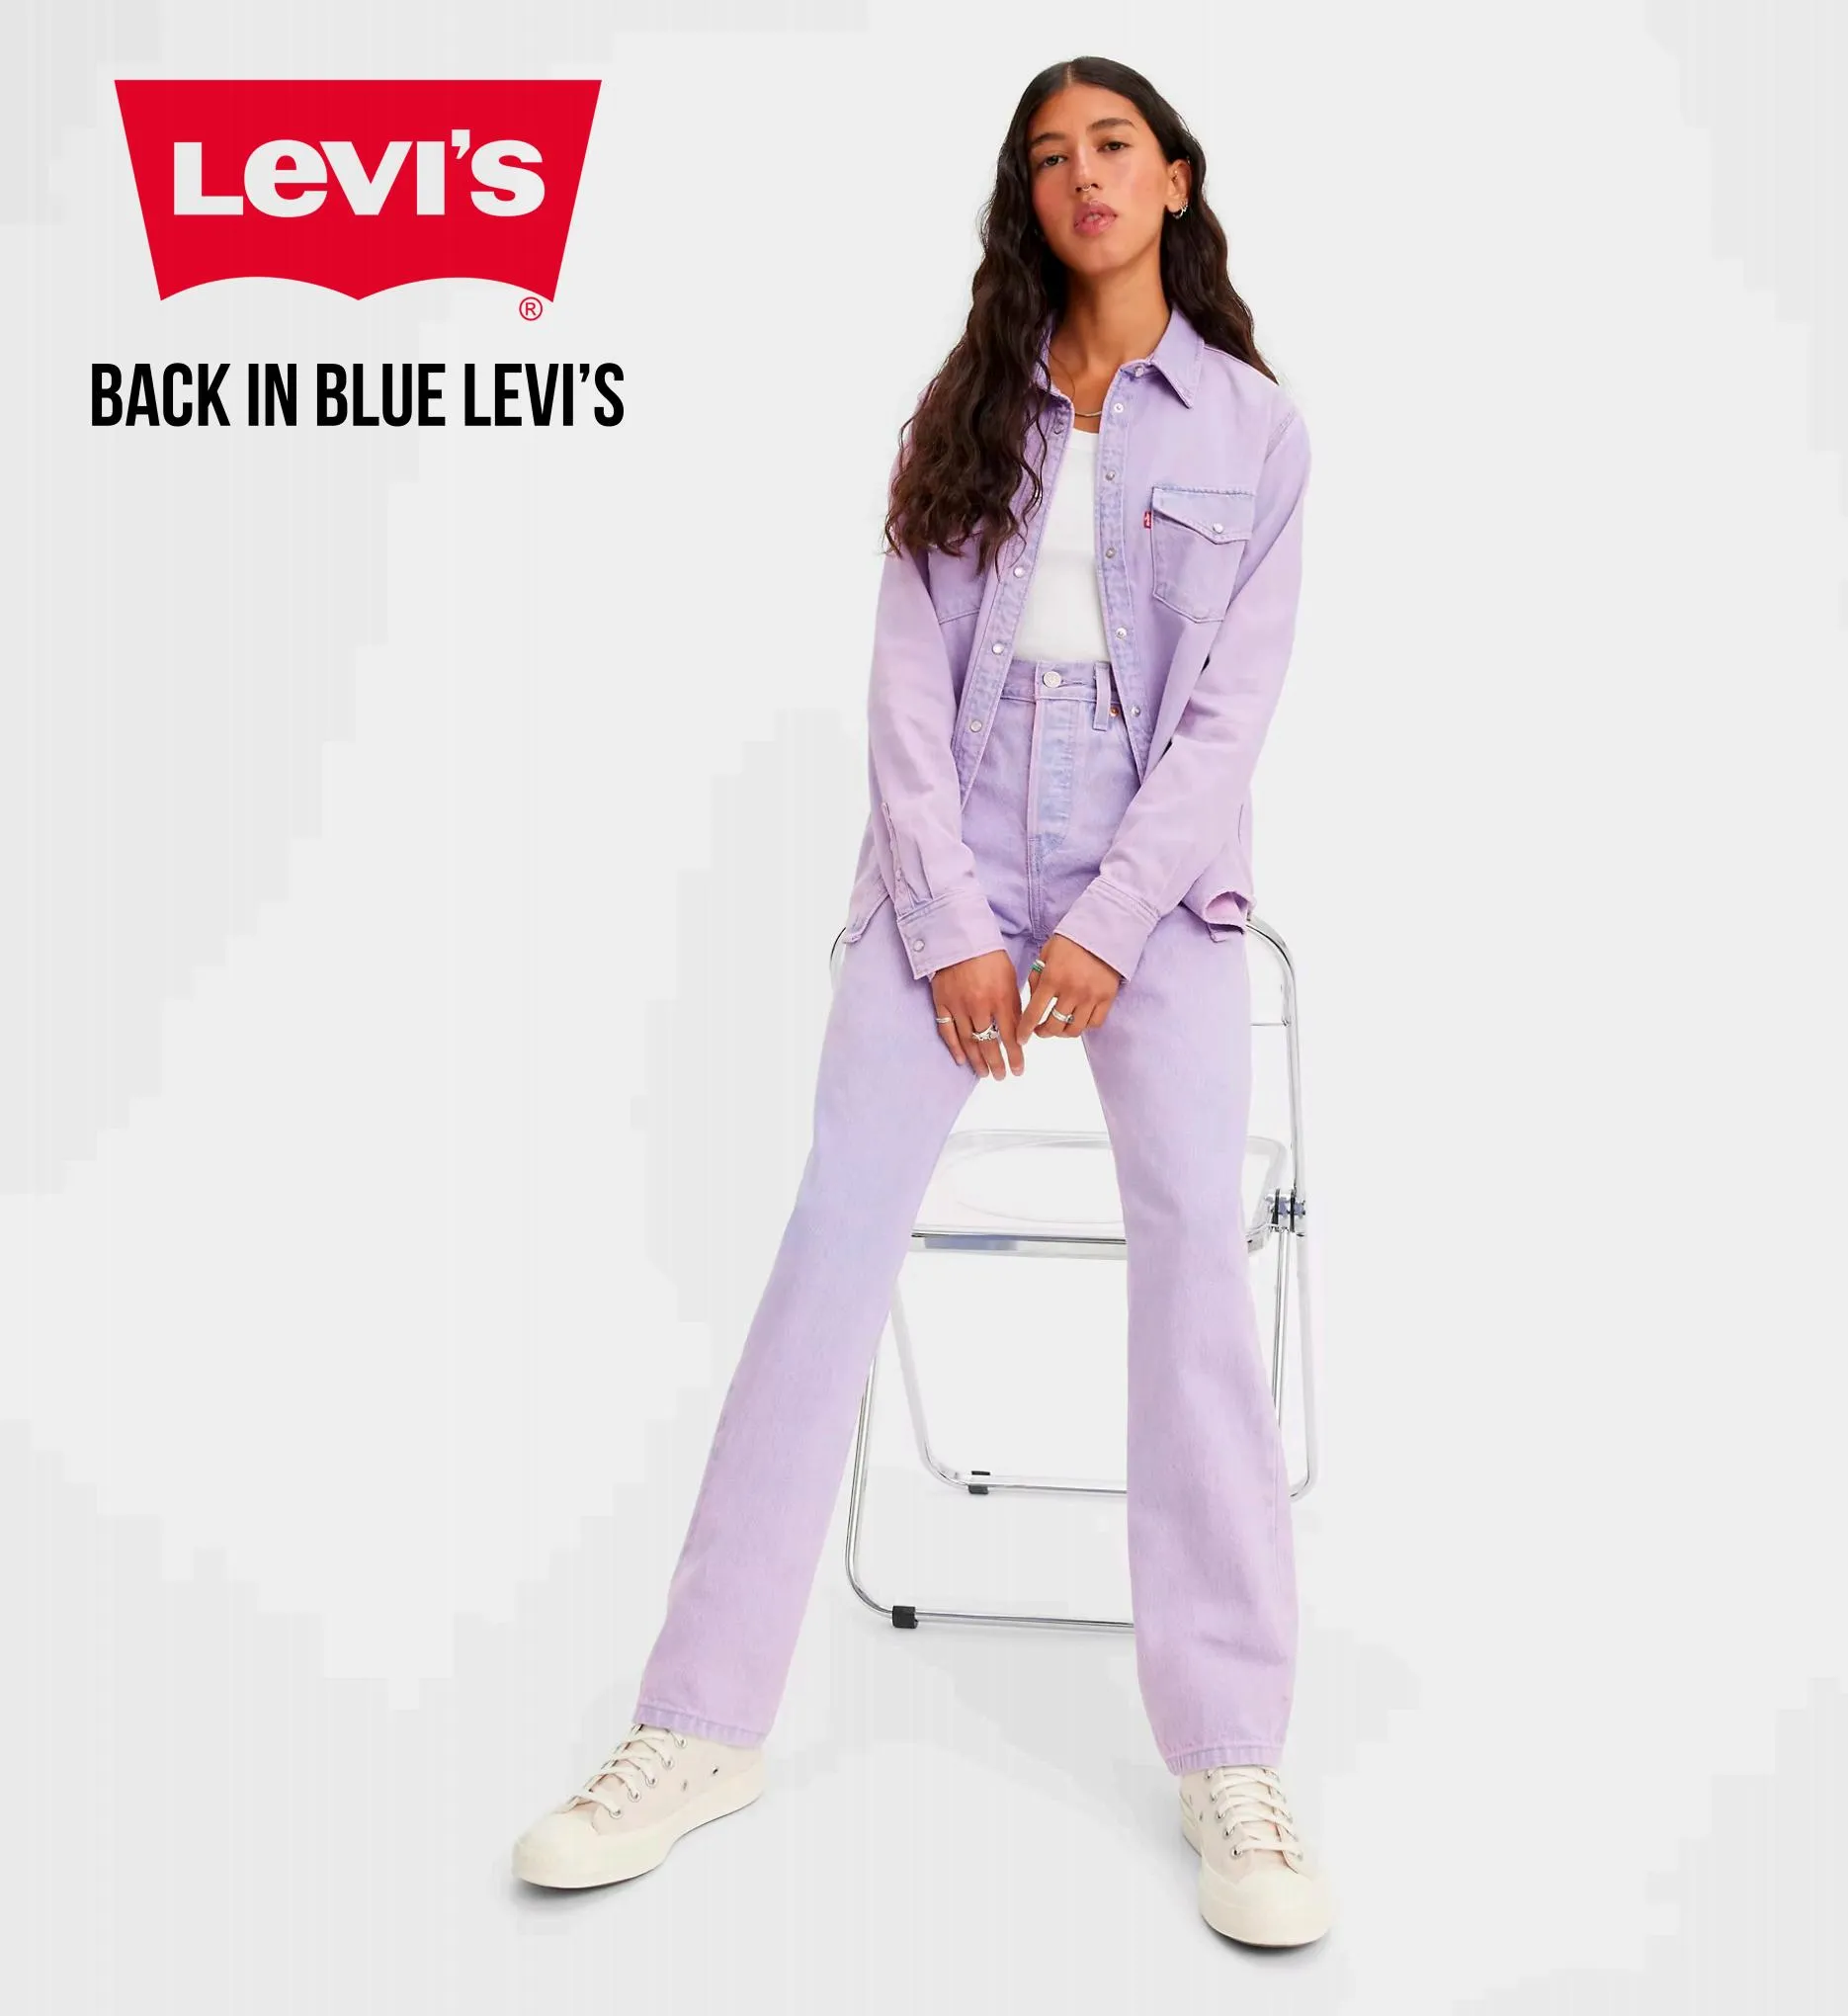 Catalogue Back in blue Levi's, page 00001